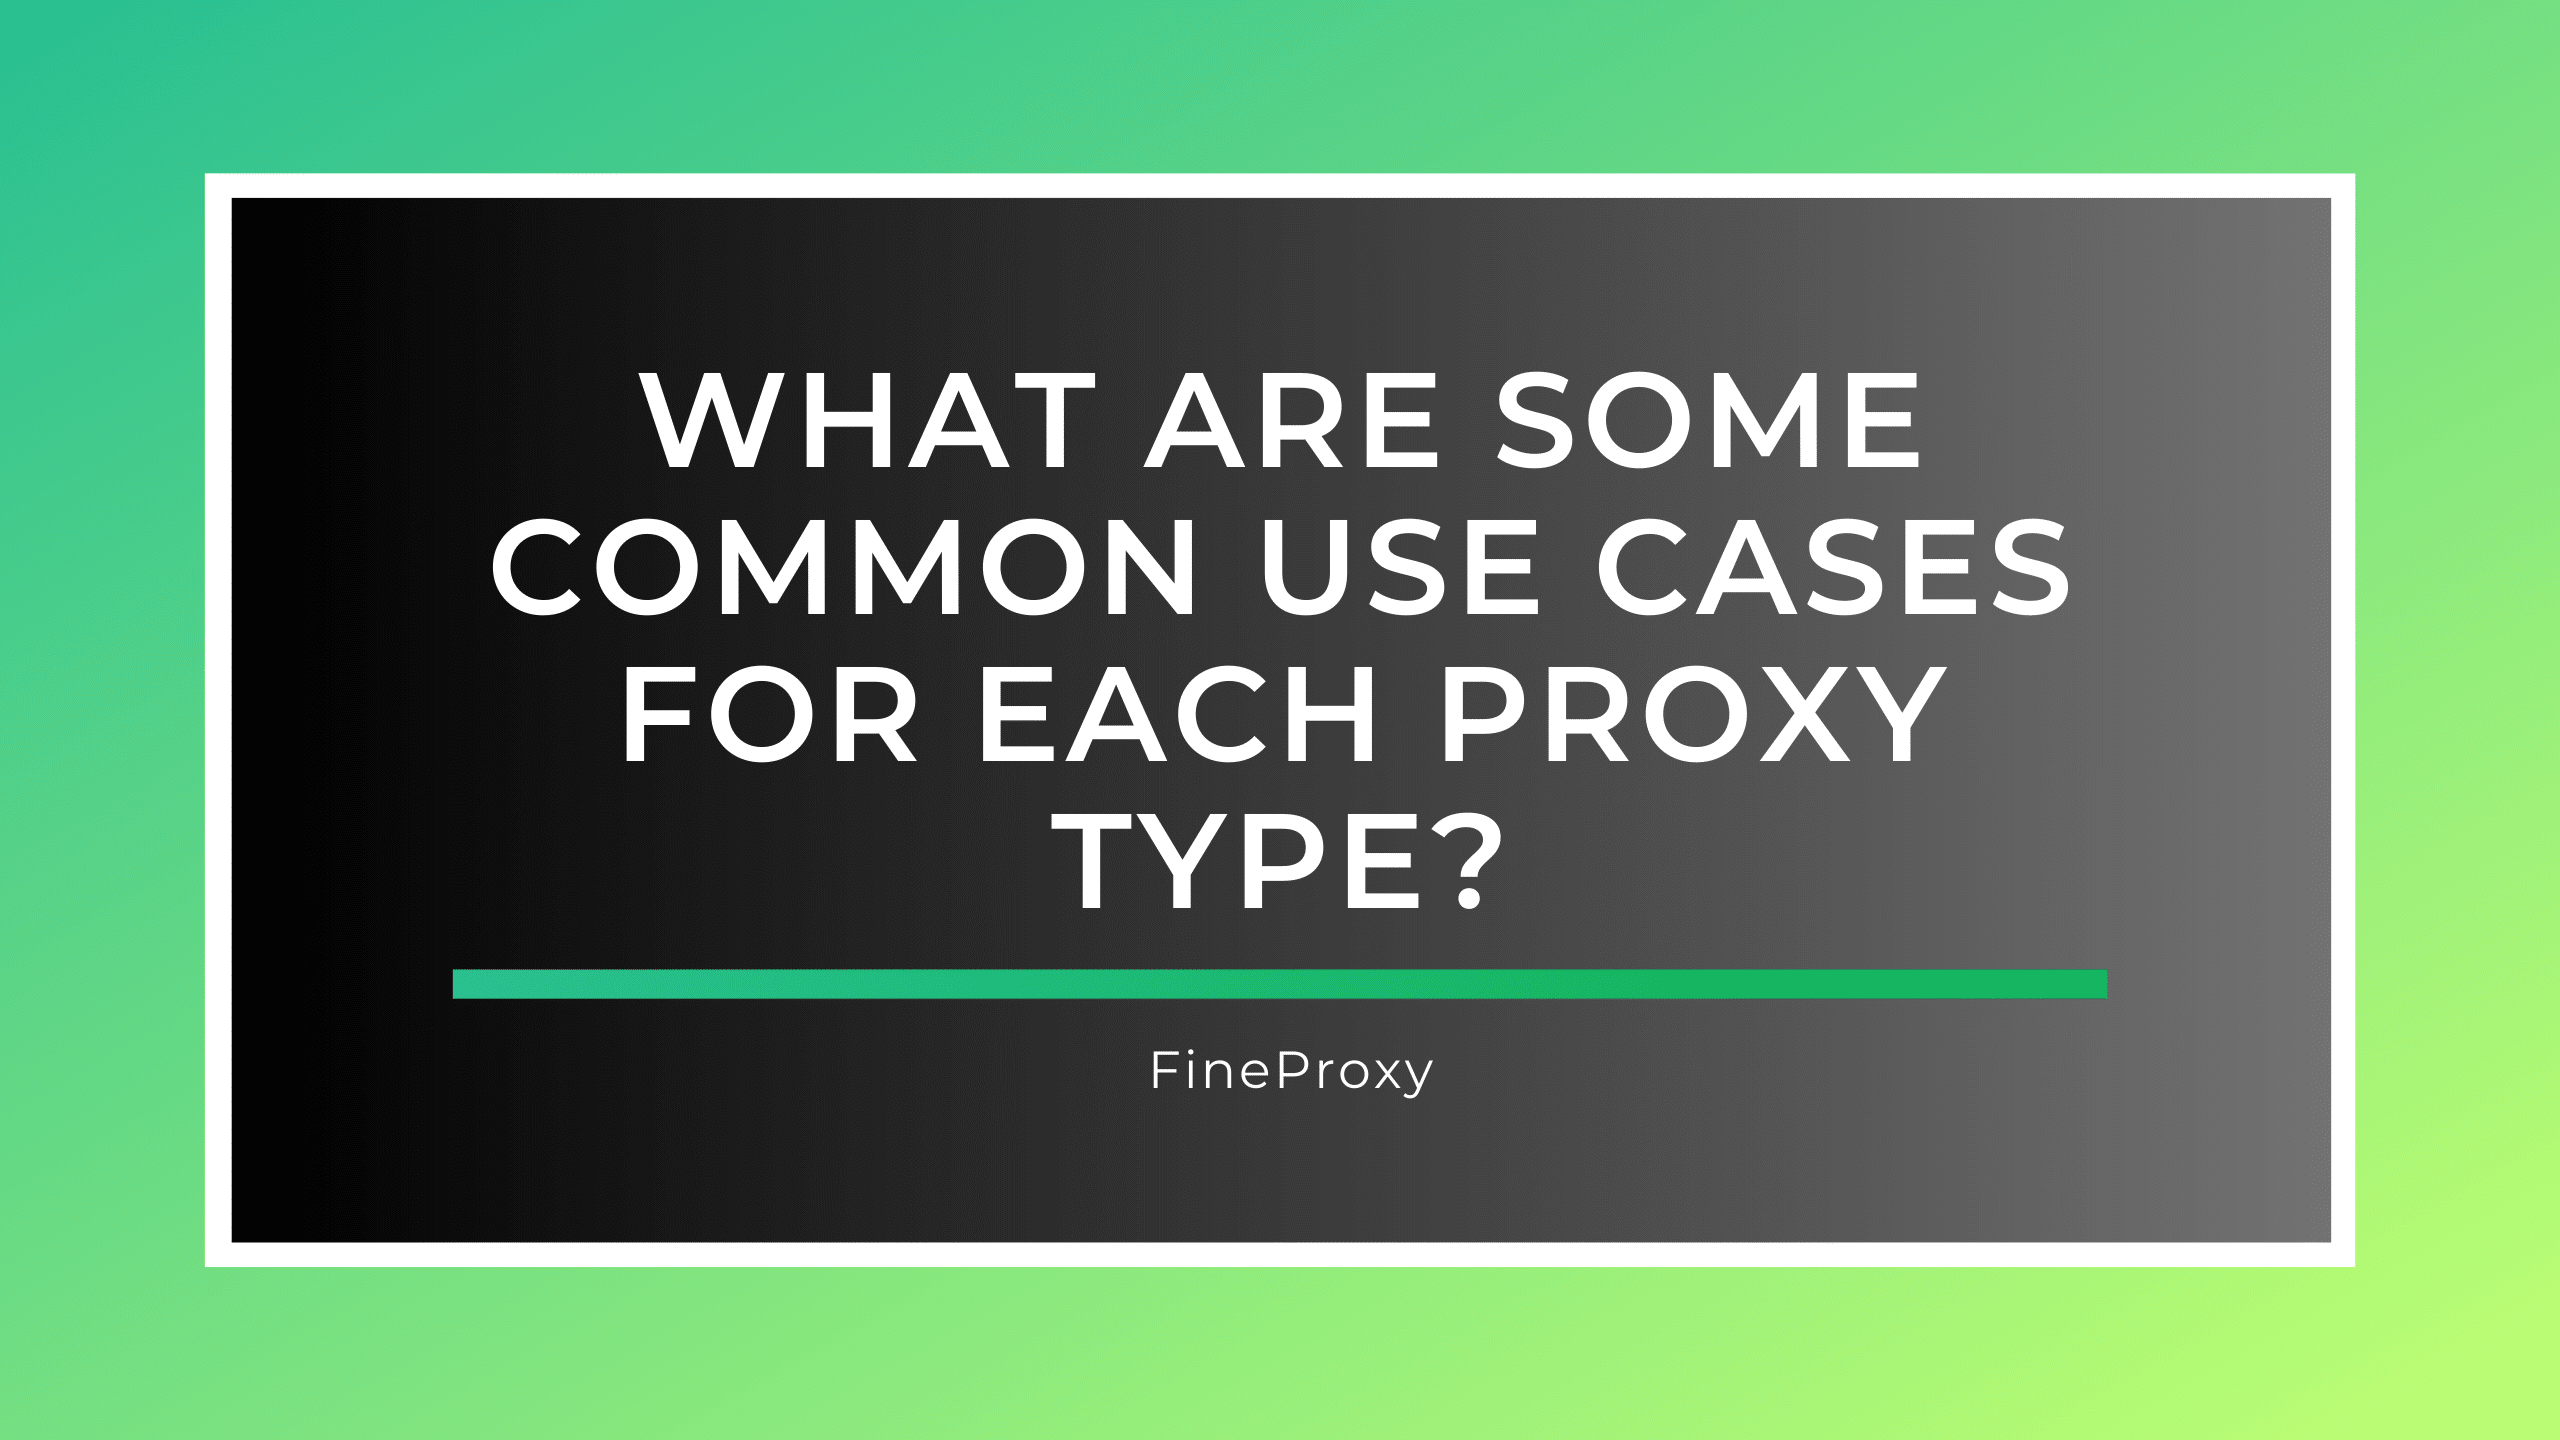 What are some common use cases for each proxy type?